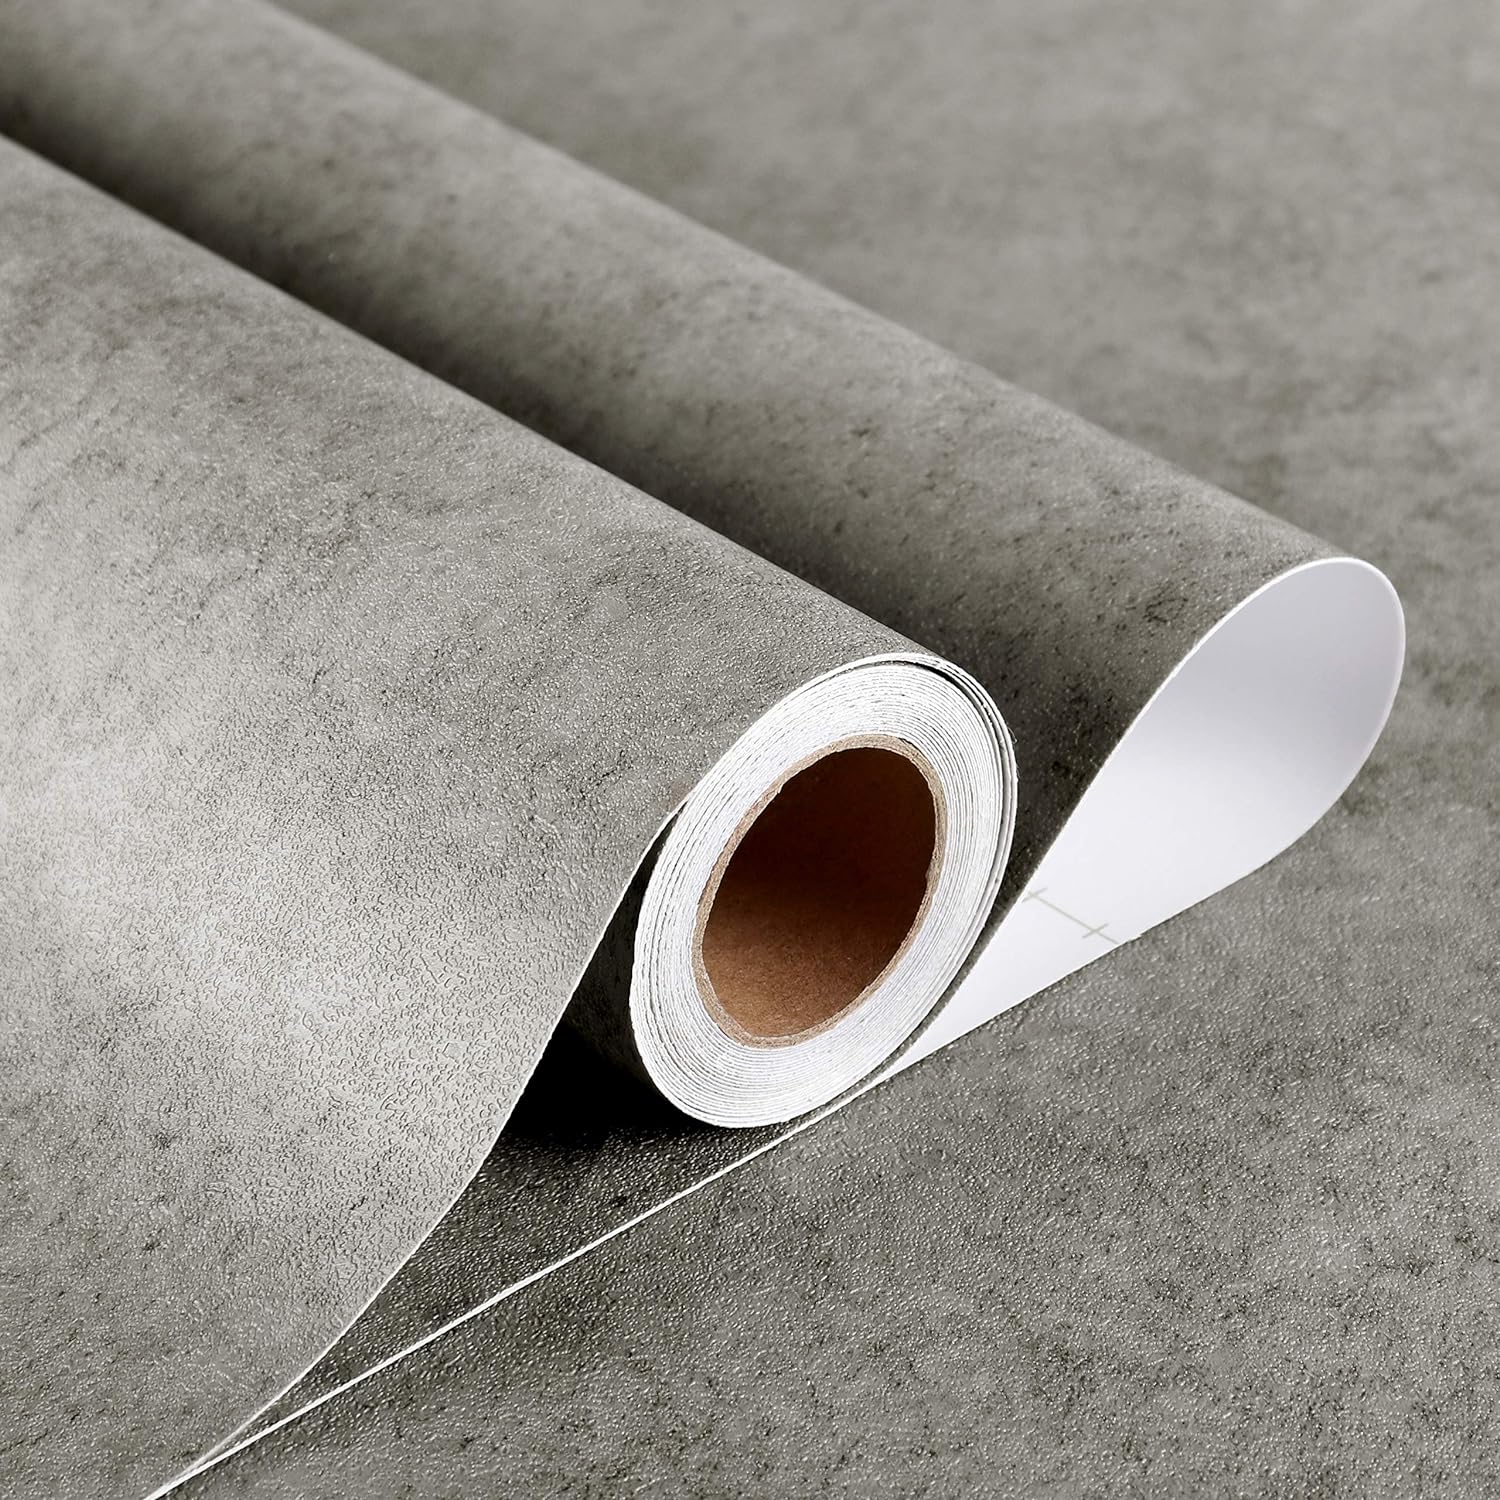 Stickyart 36x160 Thick Grey Contact Paper Textured Concrete Countertop Contact Paper Waterproof Oil Proof Self Adhesive Concrete Contact Paper for Furniture Grey Wall Covering Industrial Decorative